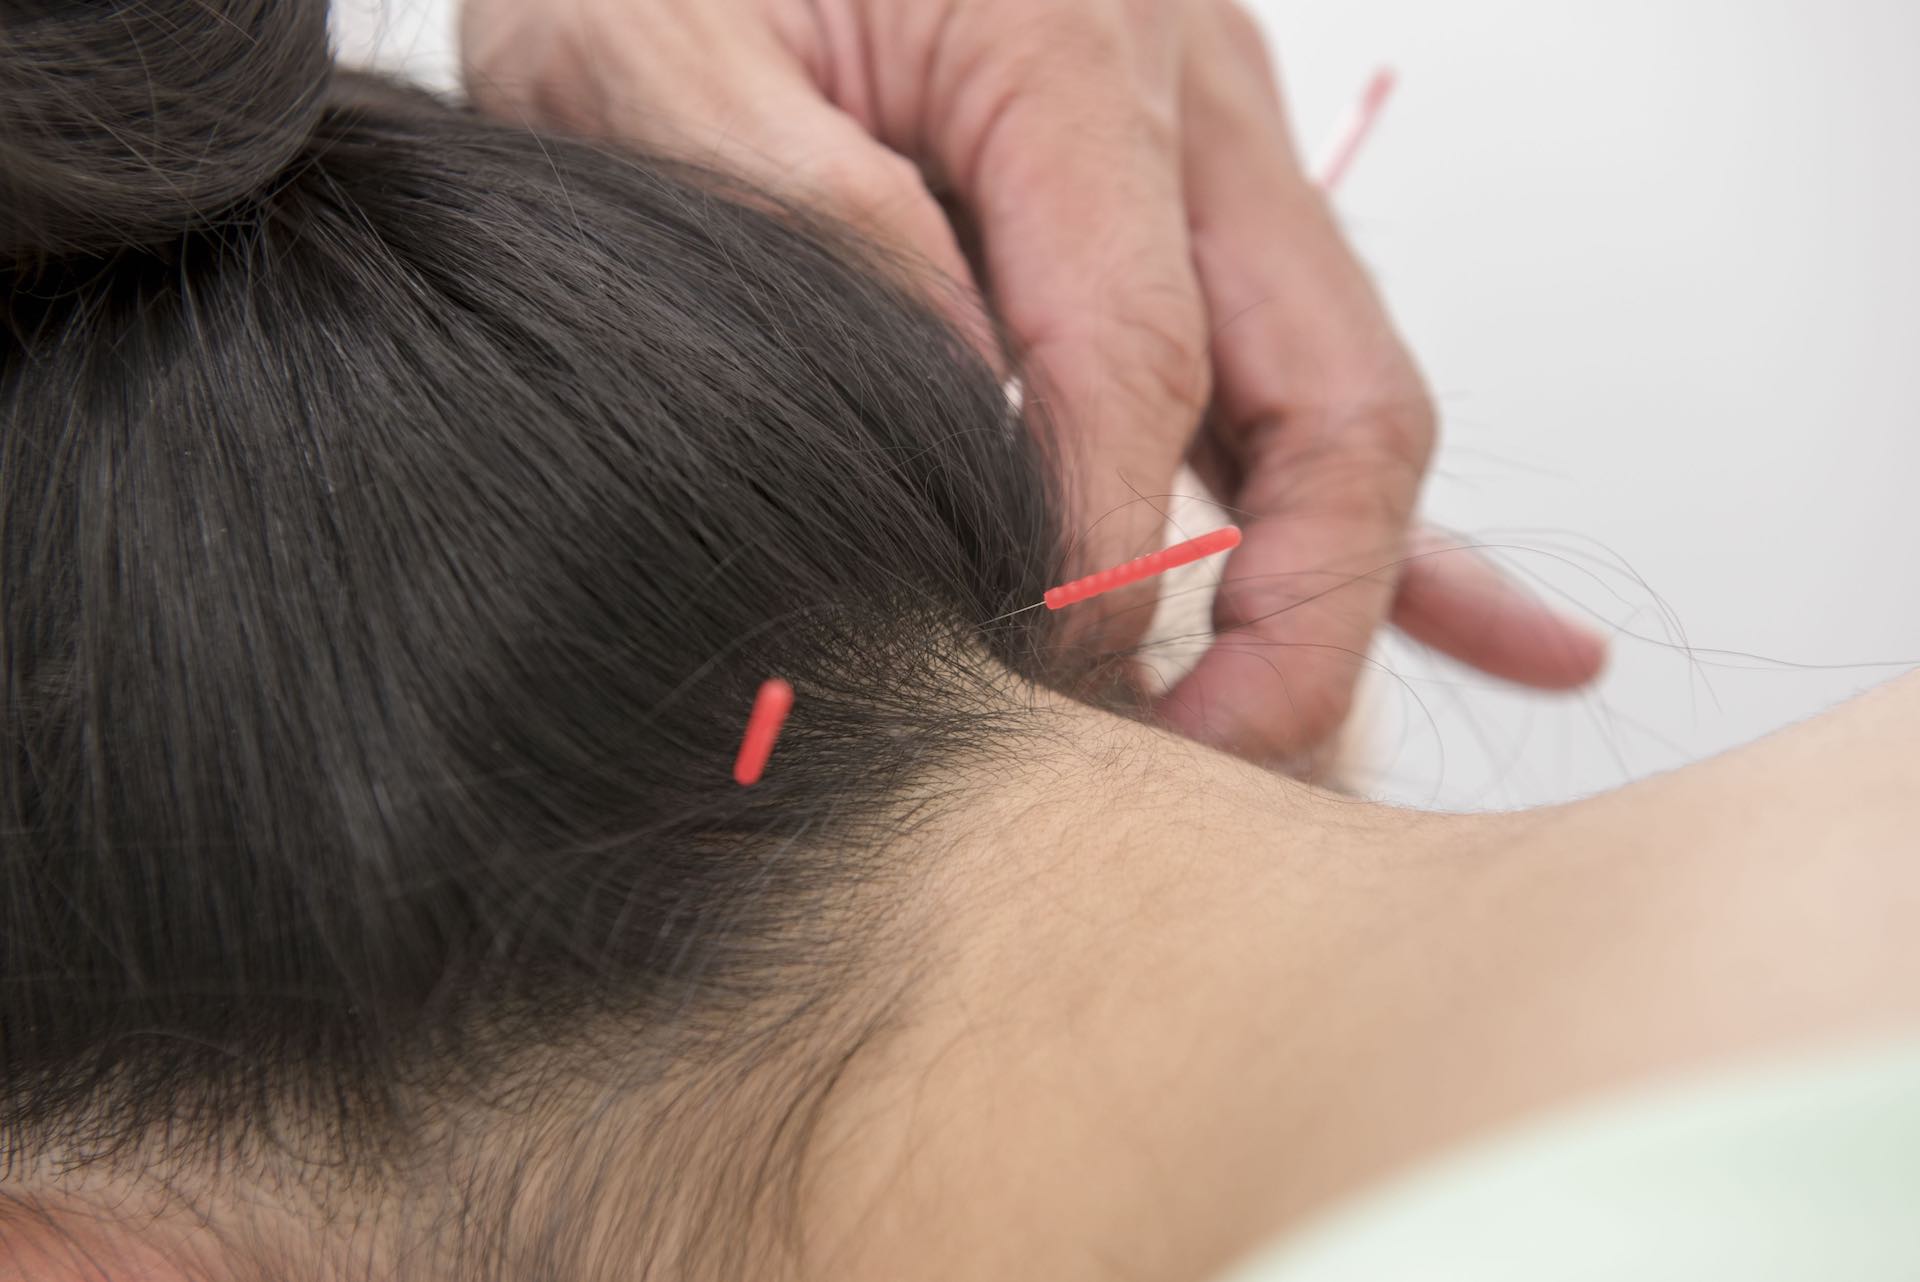 A woman get acupuncture treatment on her neck